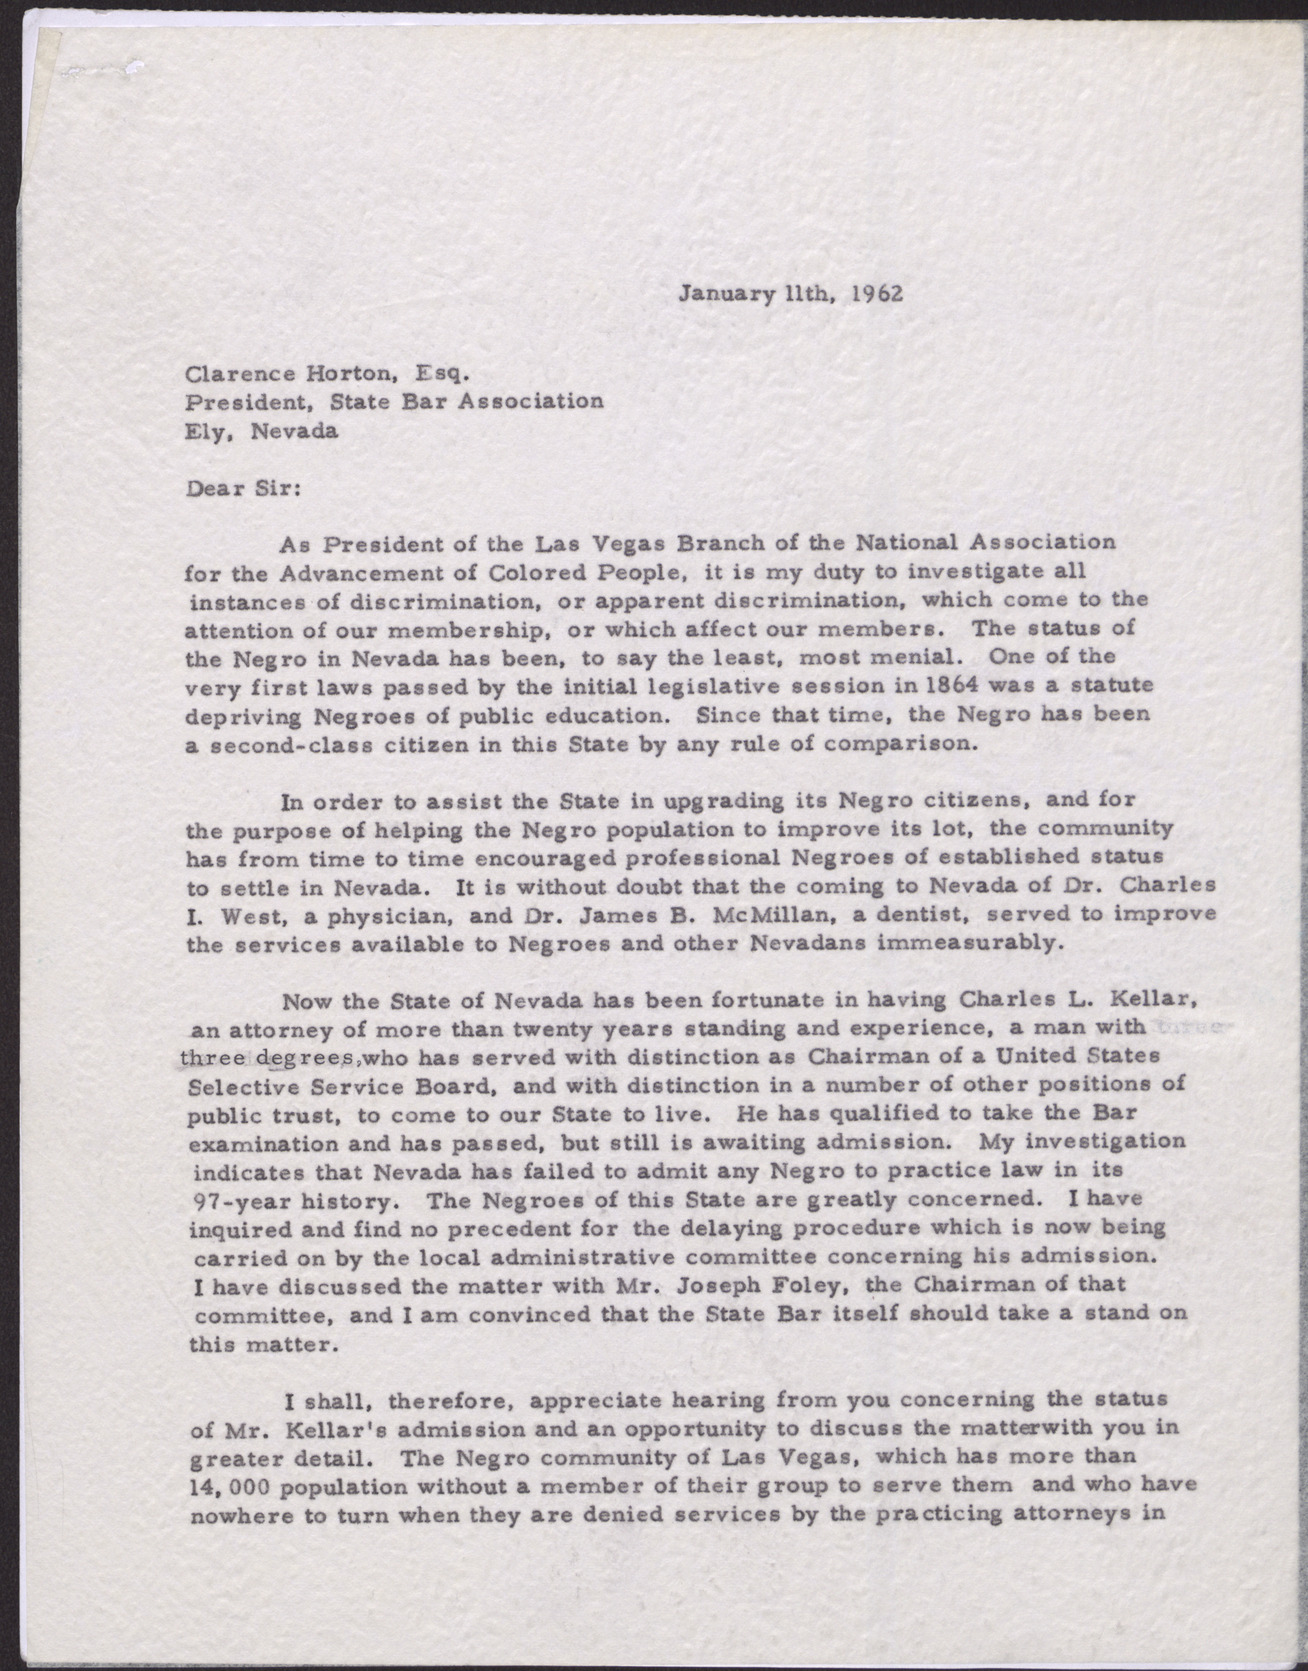 Letter to Clarence Horton from Rev. Donald M. Clark (2 pages), January 11, 1962